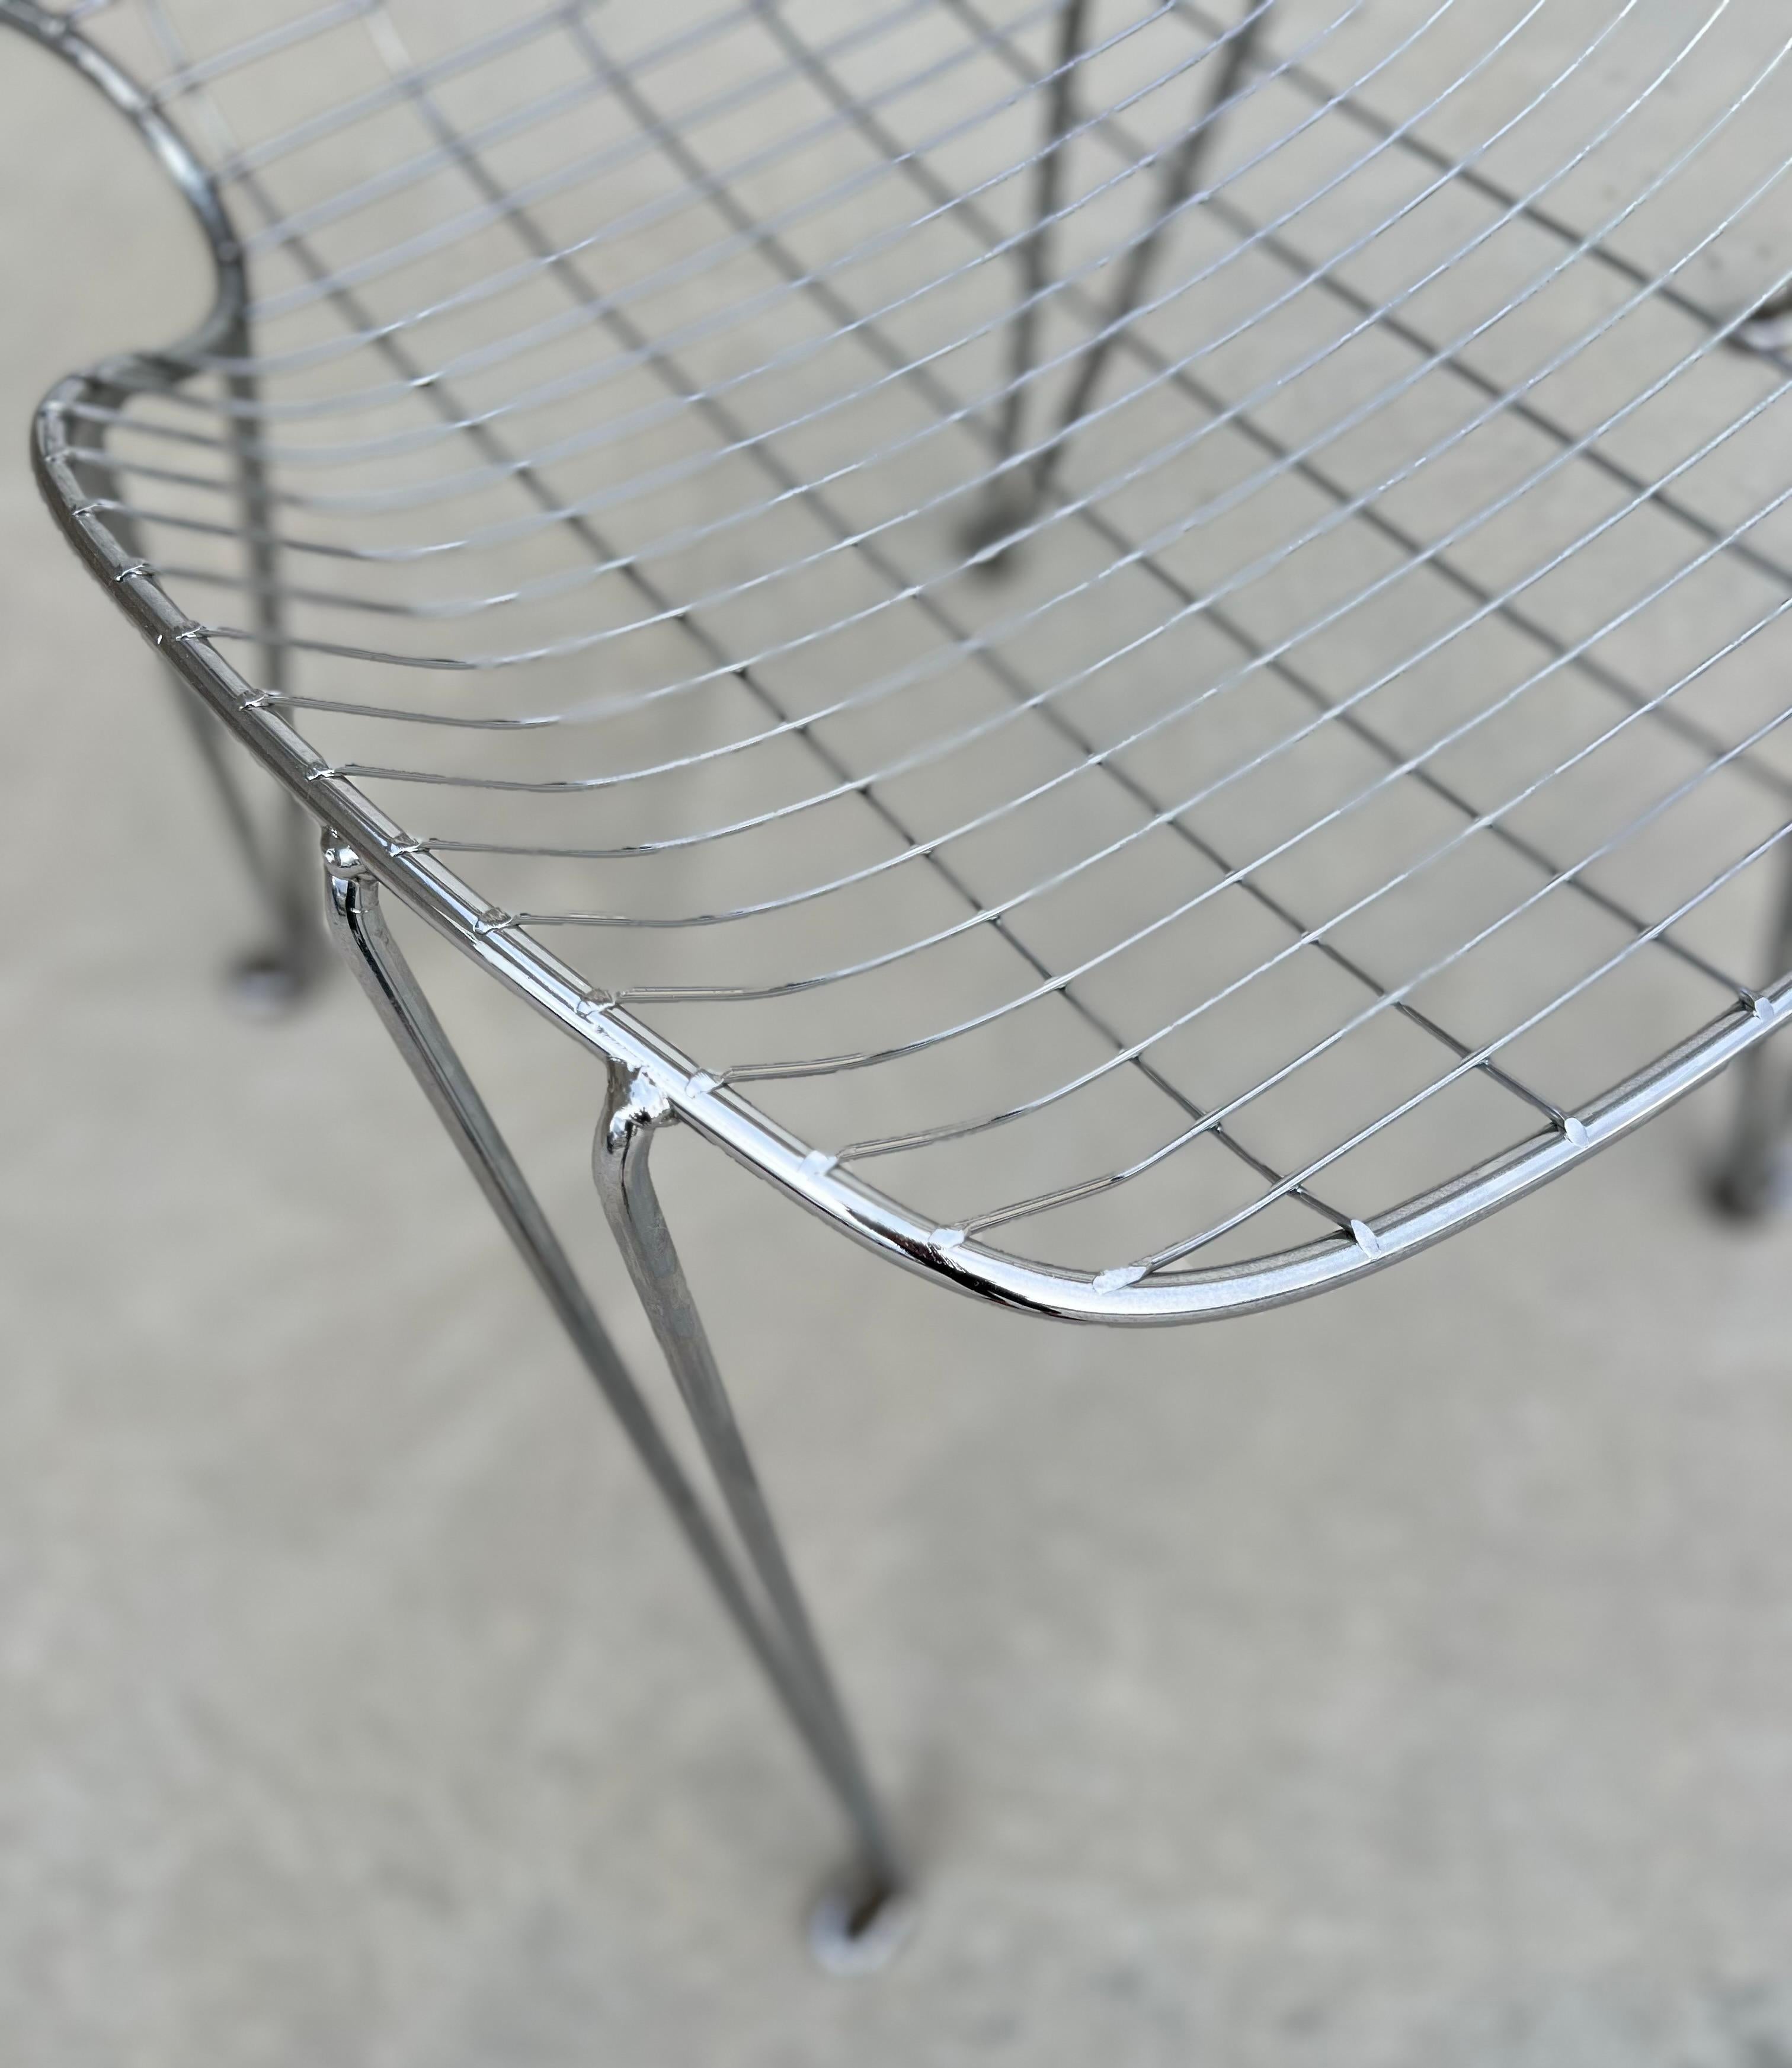 Vintage Metal Wire Chairs With Hairpin Legs - Set of Four In Good Condition For Sale In Draper, UT